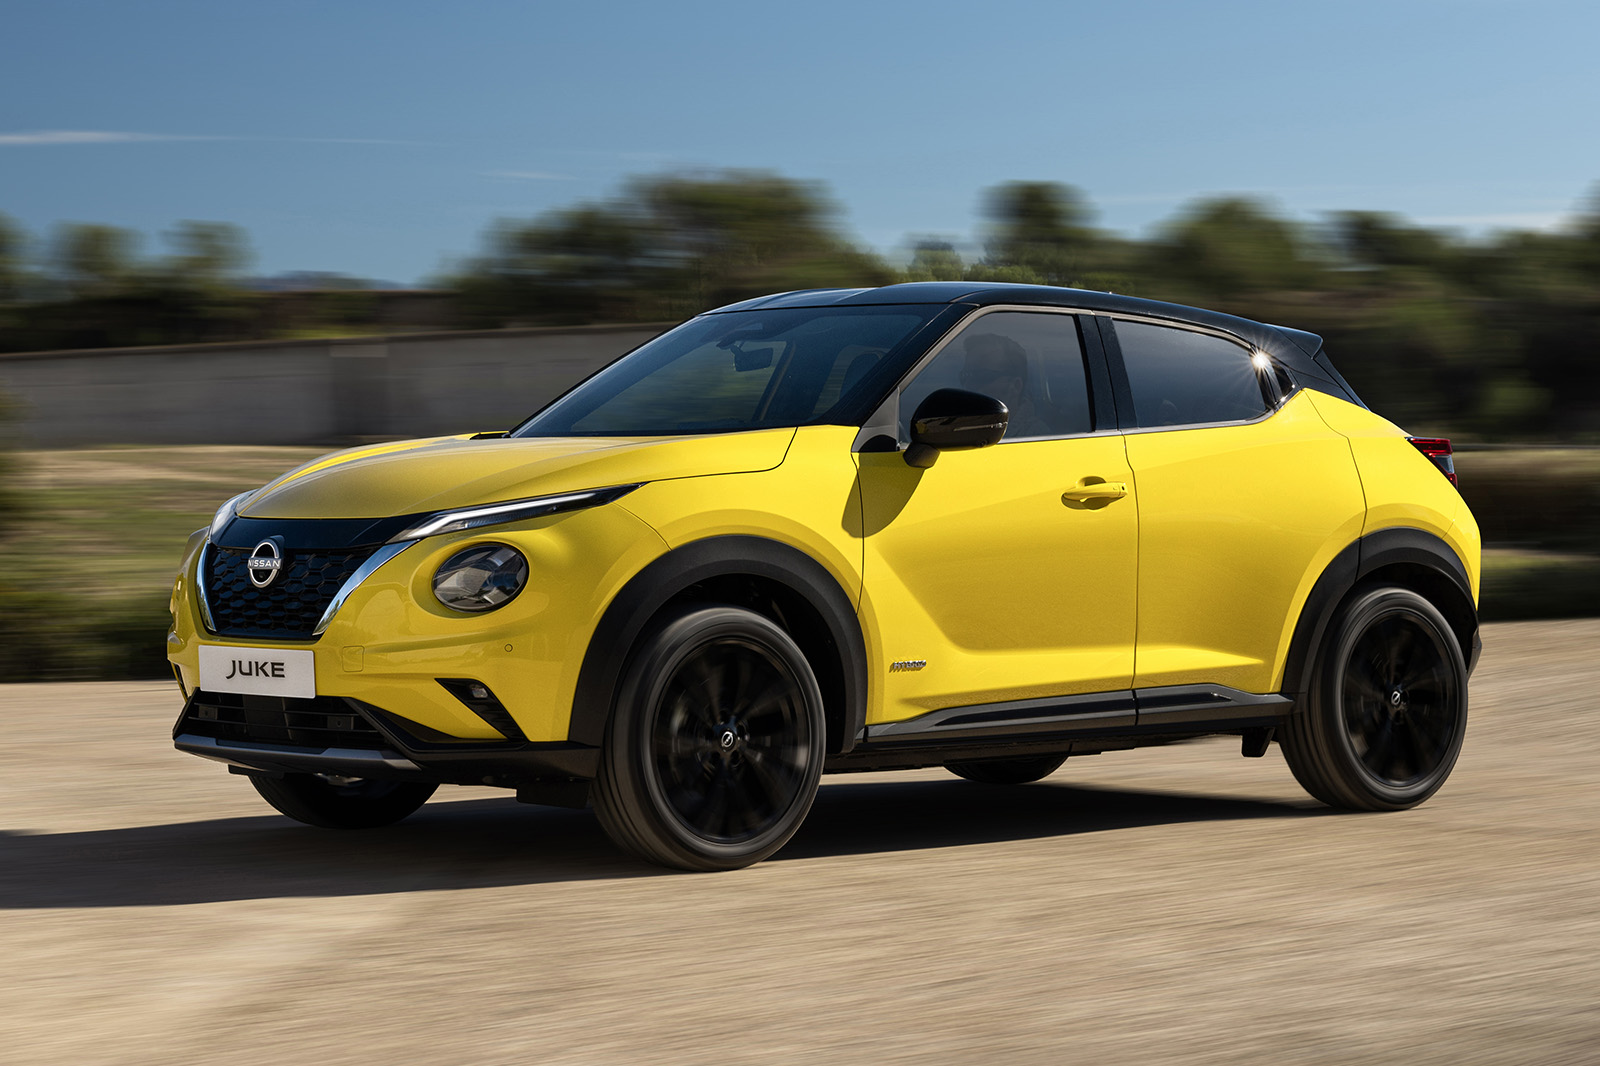 Nissan Juke revamped with bigger touchscreen and improved quality